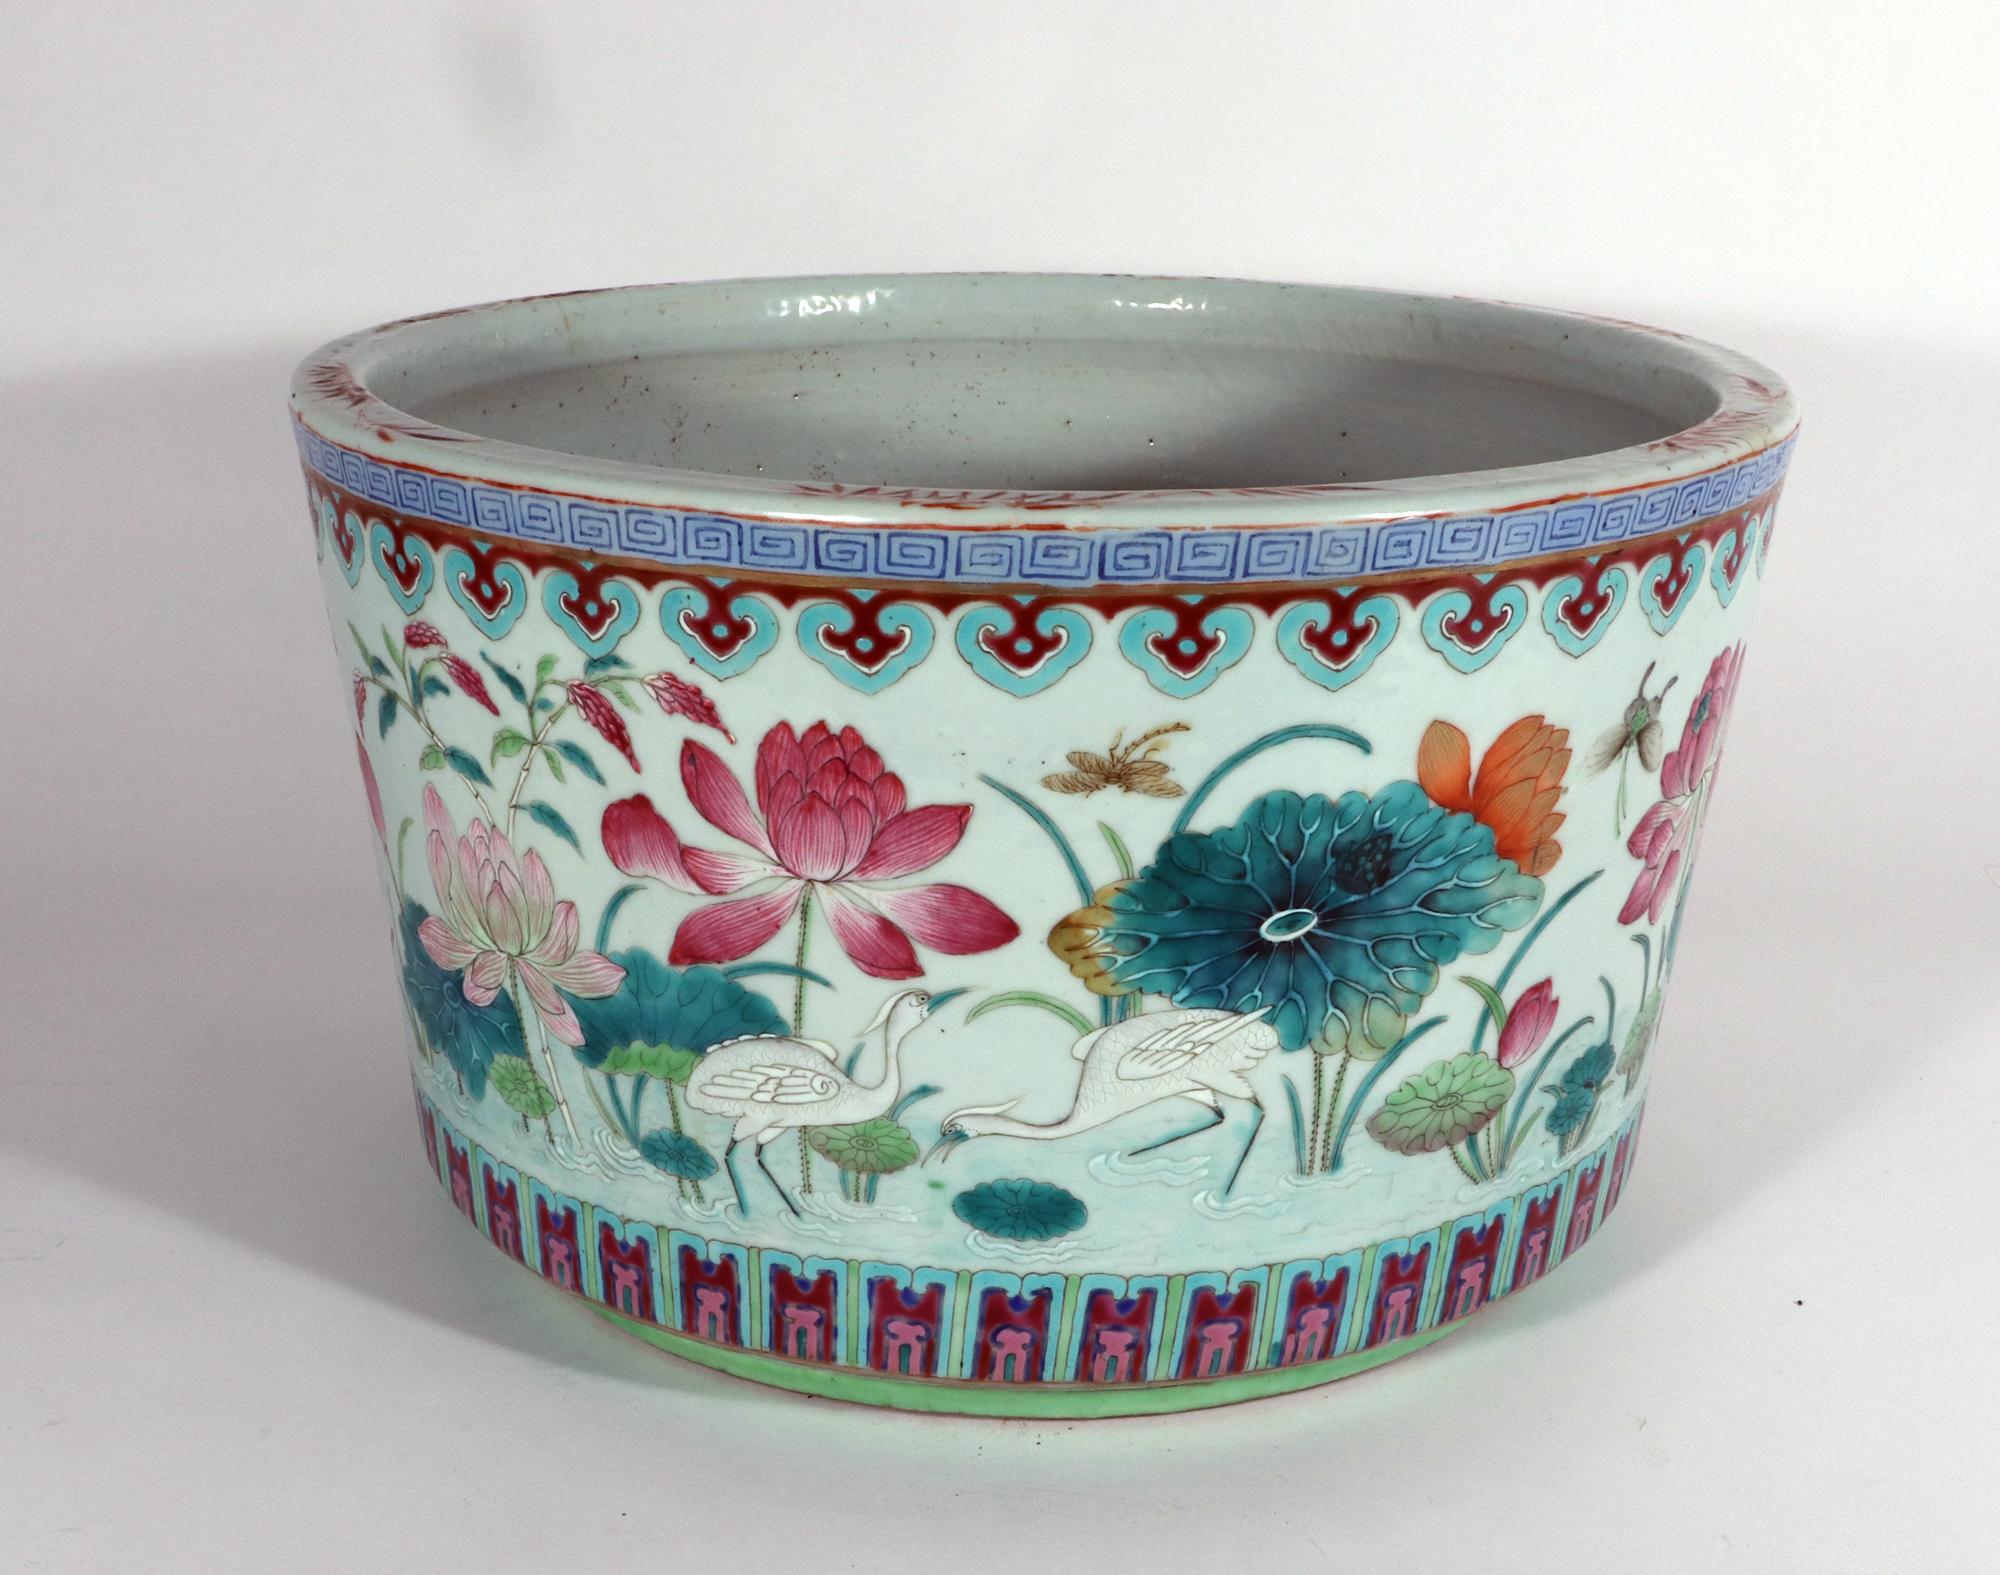 Chinese Porcelain Large Jardiniere
Mid-19th Century

The Chinese porcelain planter or jardiniere has an unglazed interior with a drainage hole.  The exterior with a continuous scene of famille rose lotus flowers and leaves in a pond with several